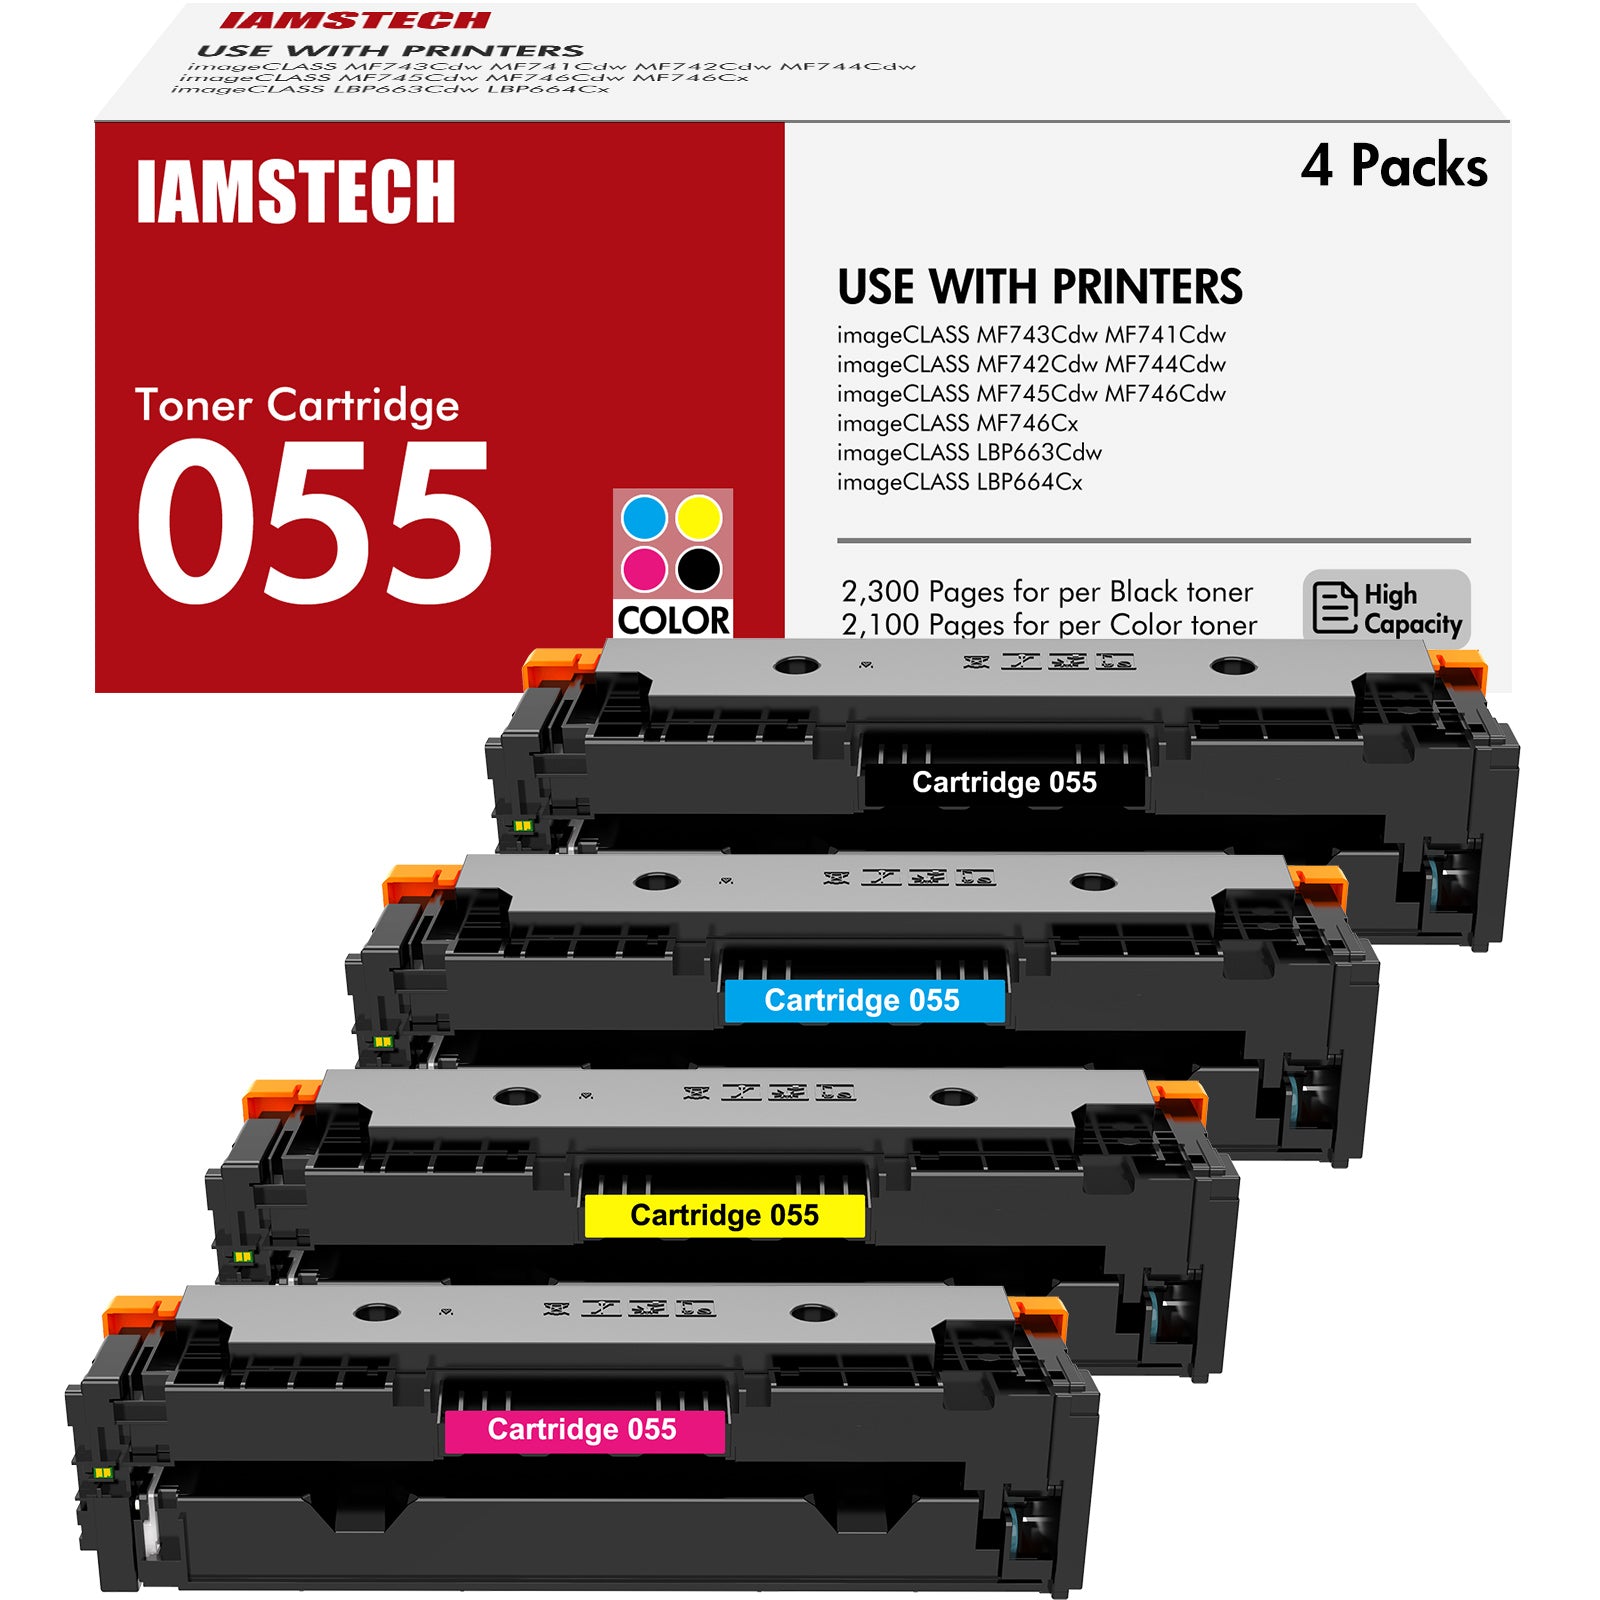 055 055H Toner Cartridge Replacement Compatible for Canon Cartridge 055 055H Color ImageCLASS MF743Cdw MF741Cdw MF745Cdw MF746Cdw LBP664Cdw Laser Printer(Black Cyan Magenta Yellow 4PACK)